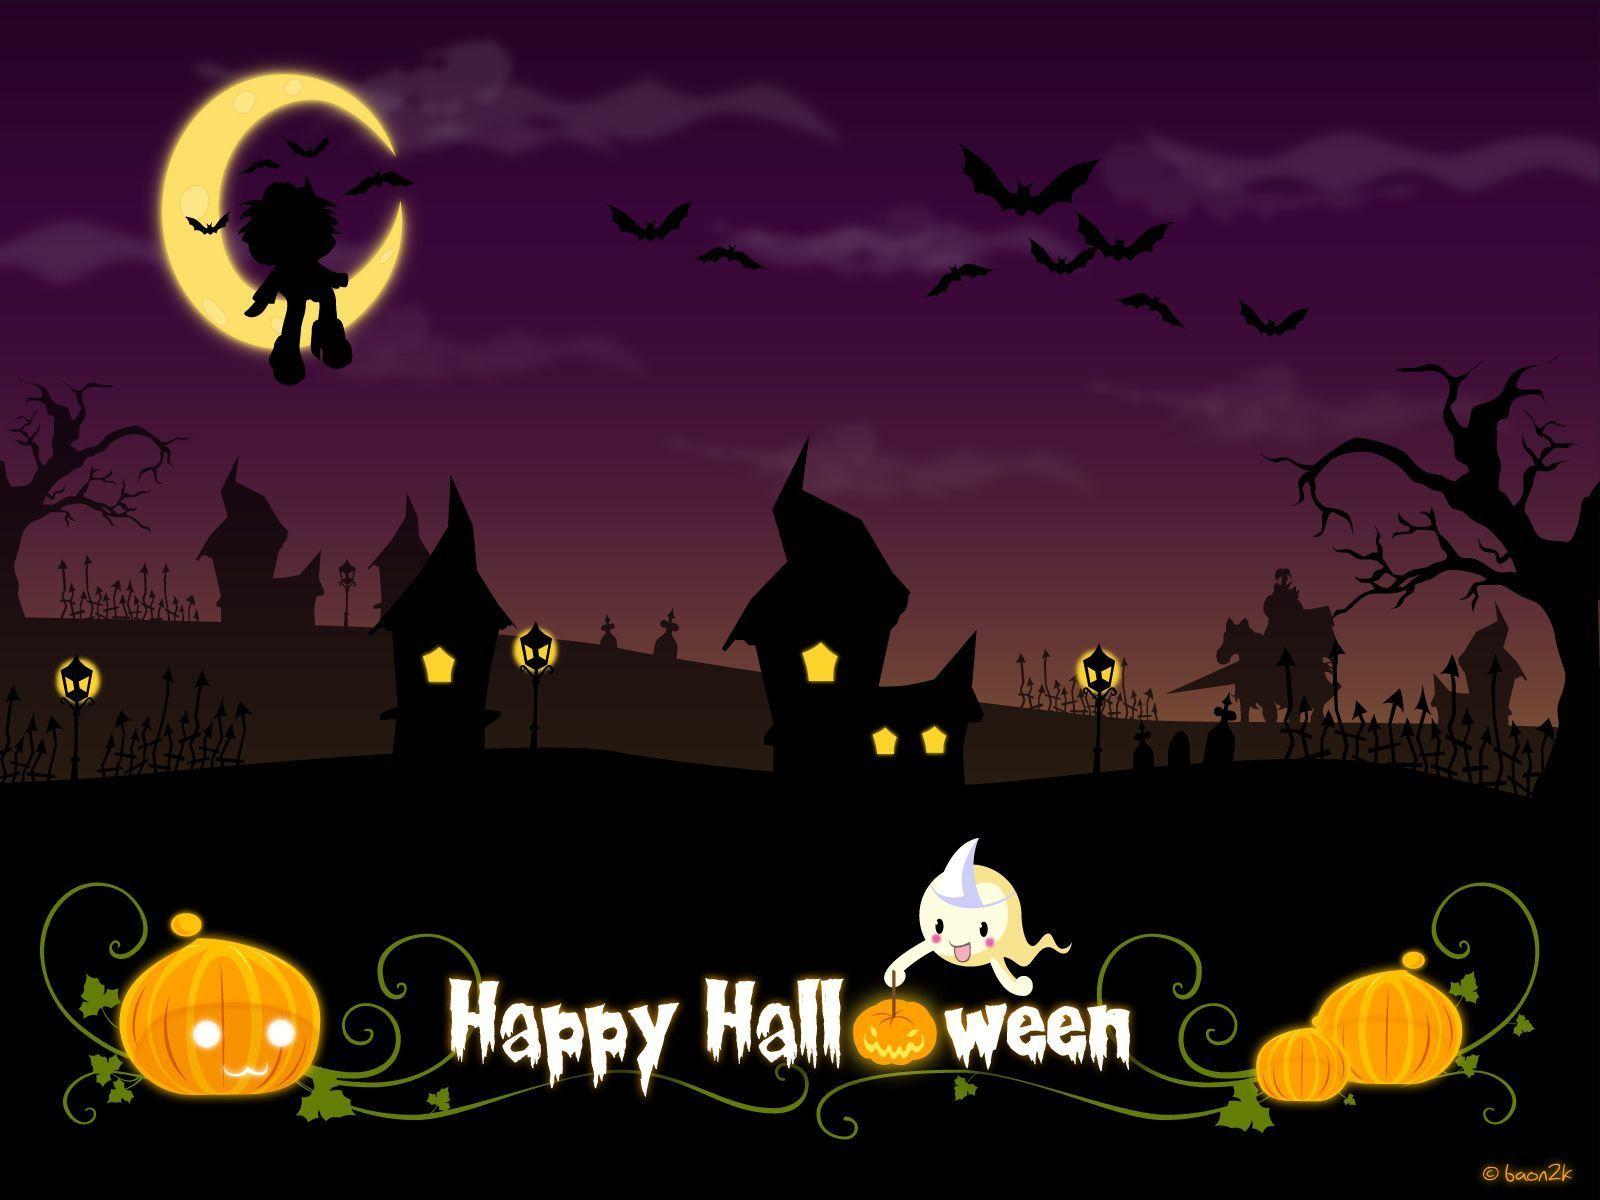 Wallpaper For > Happy Halloween Background Image